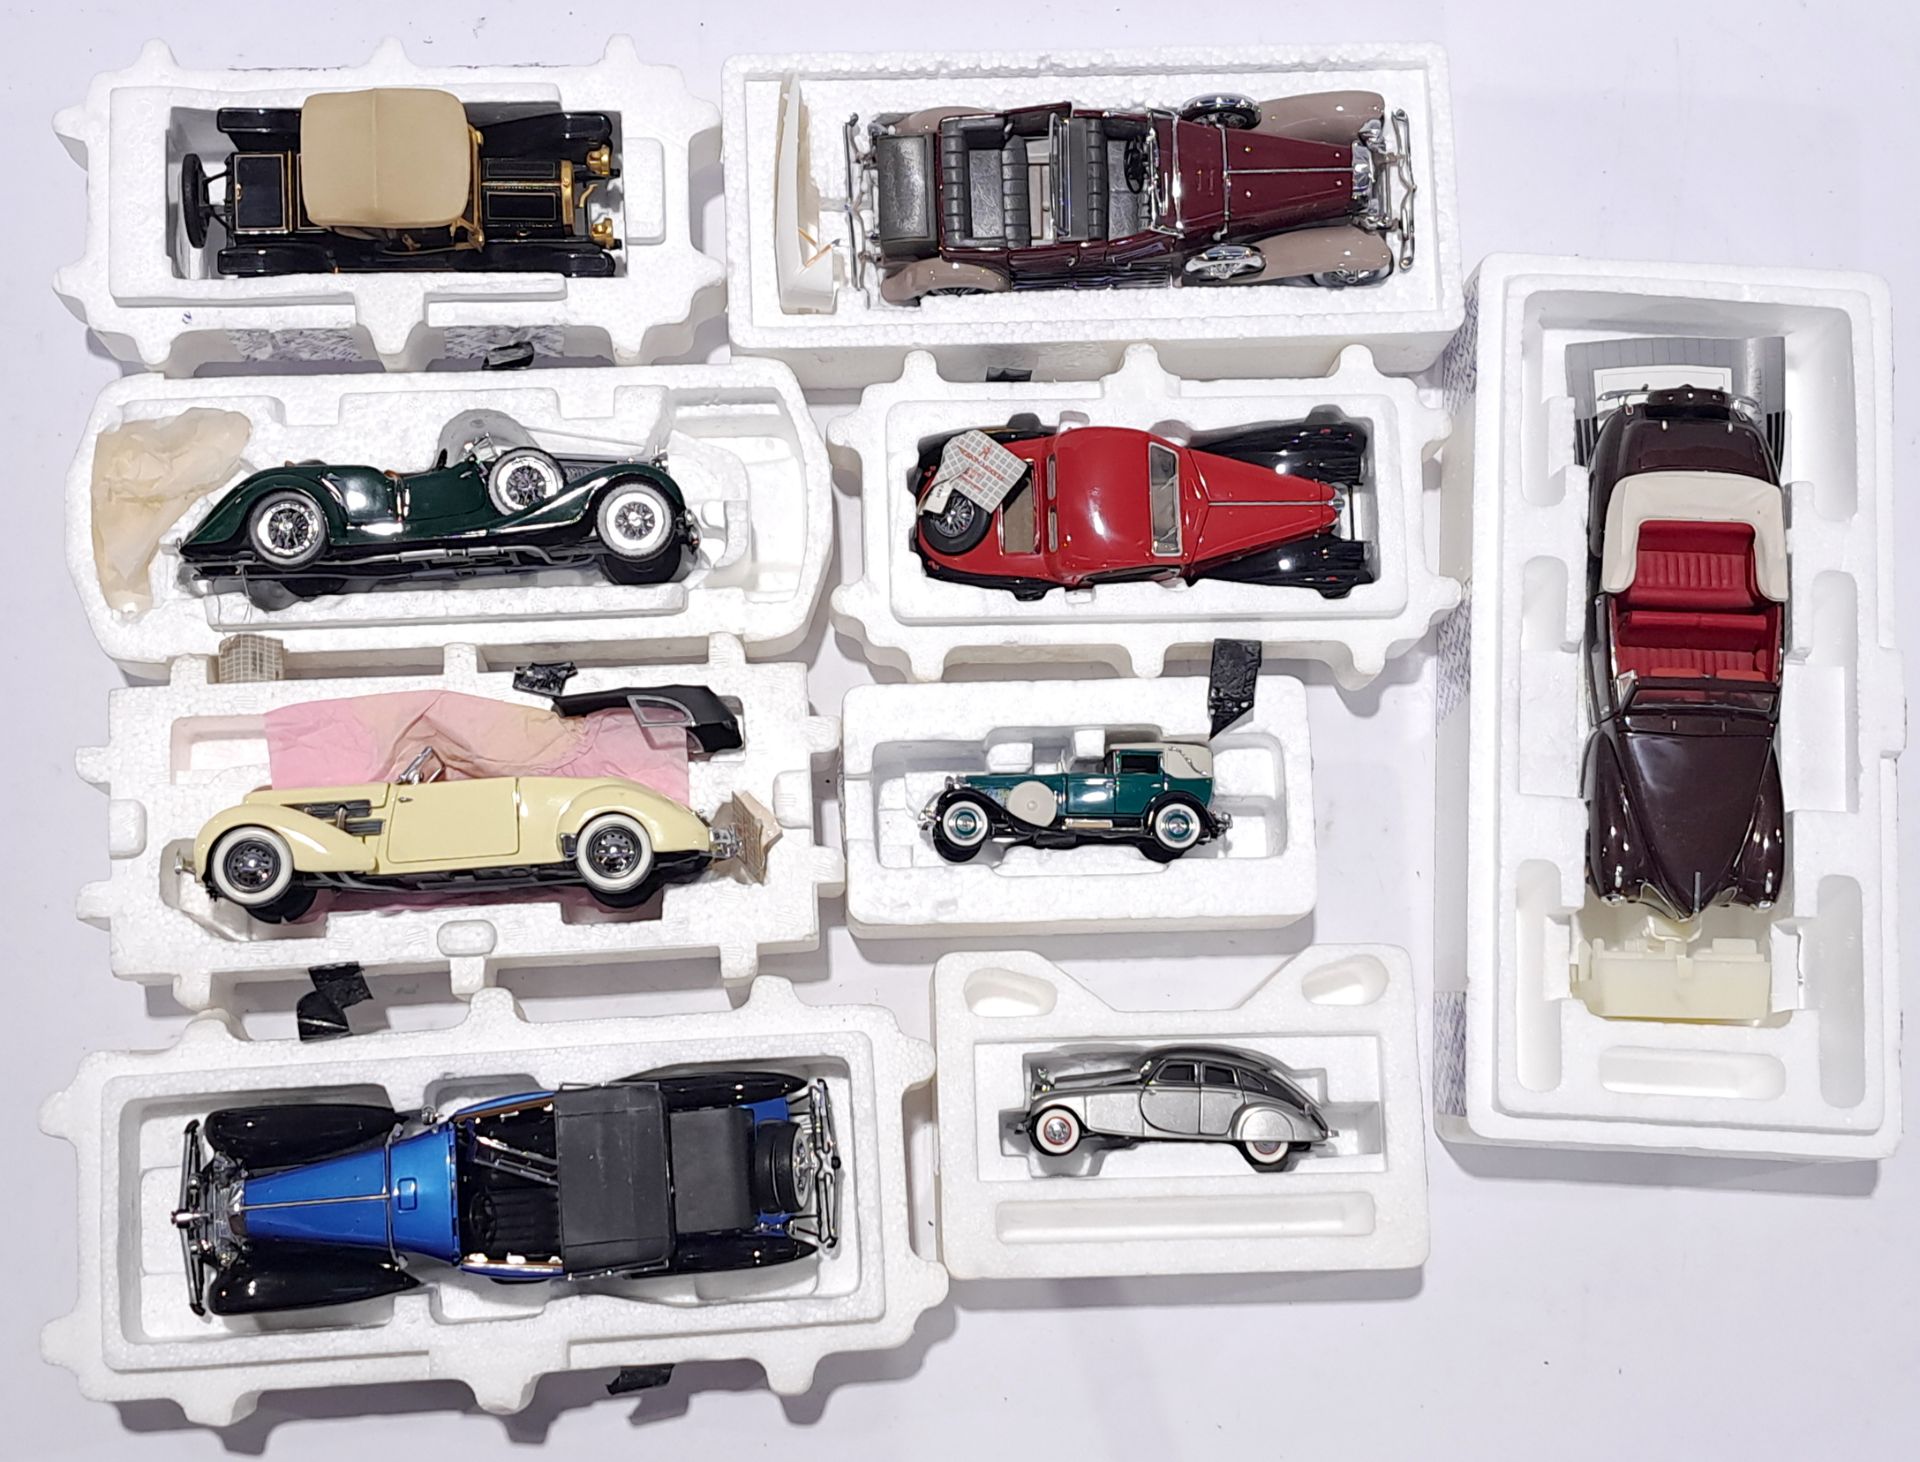 Franklin Mint a mixed group of Cars with polystyrene boxes (No outer boxes). Not checked for comp...